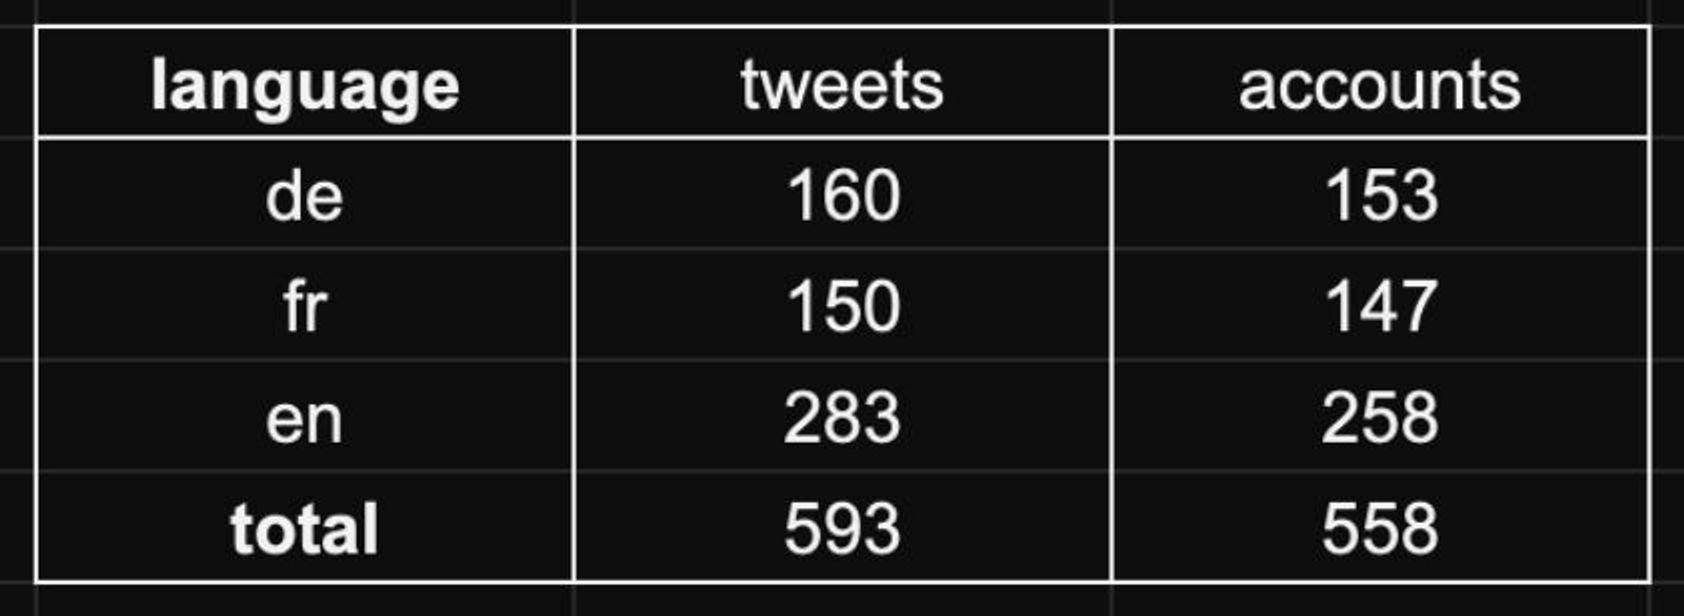 Number of accounts and tweets posting the video, sorted by language